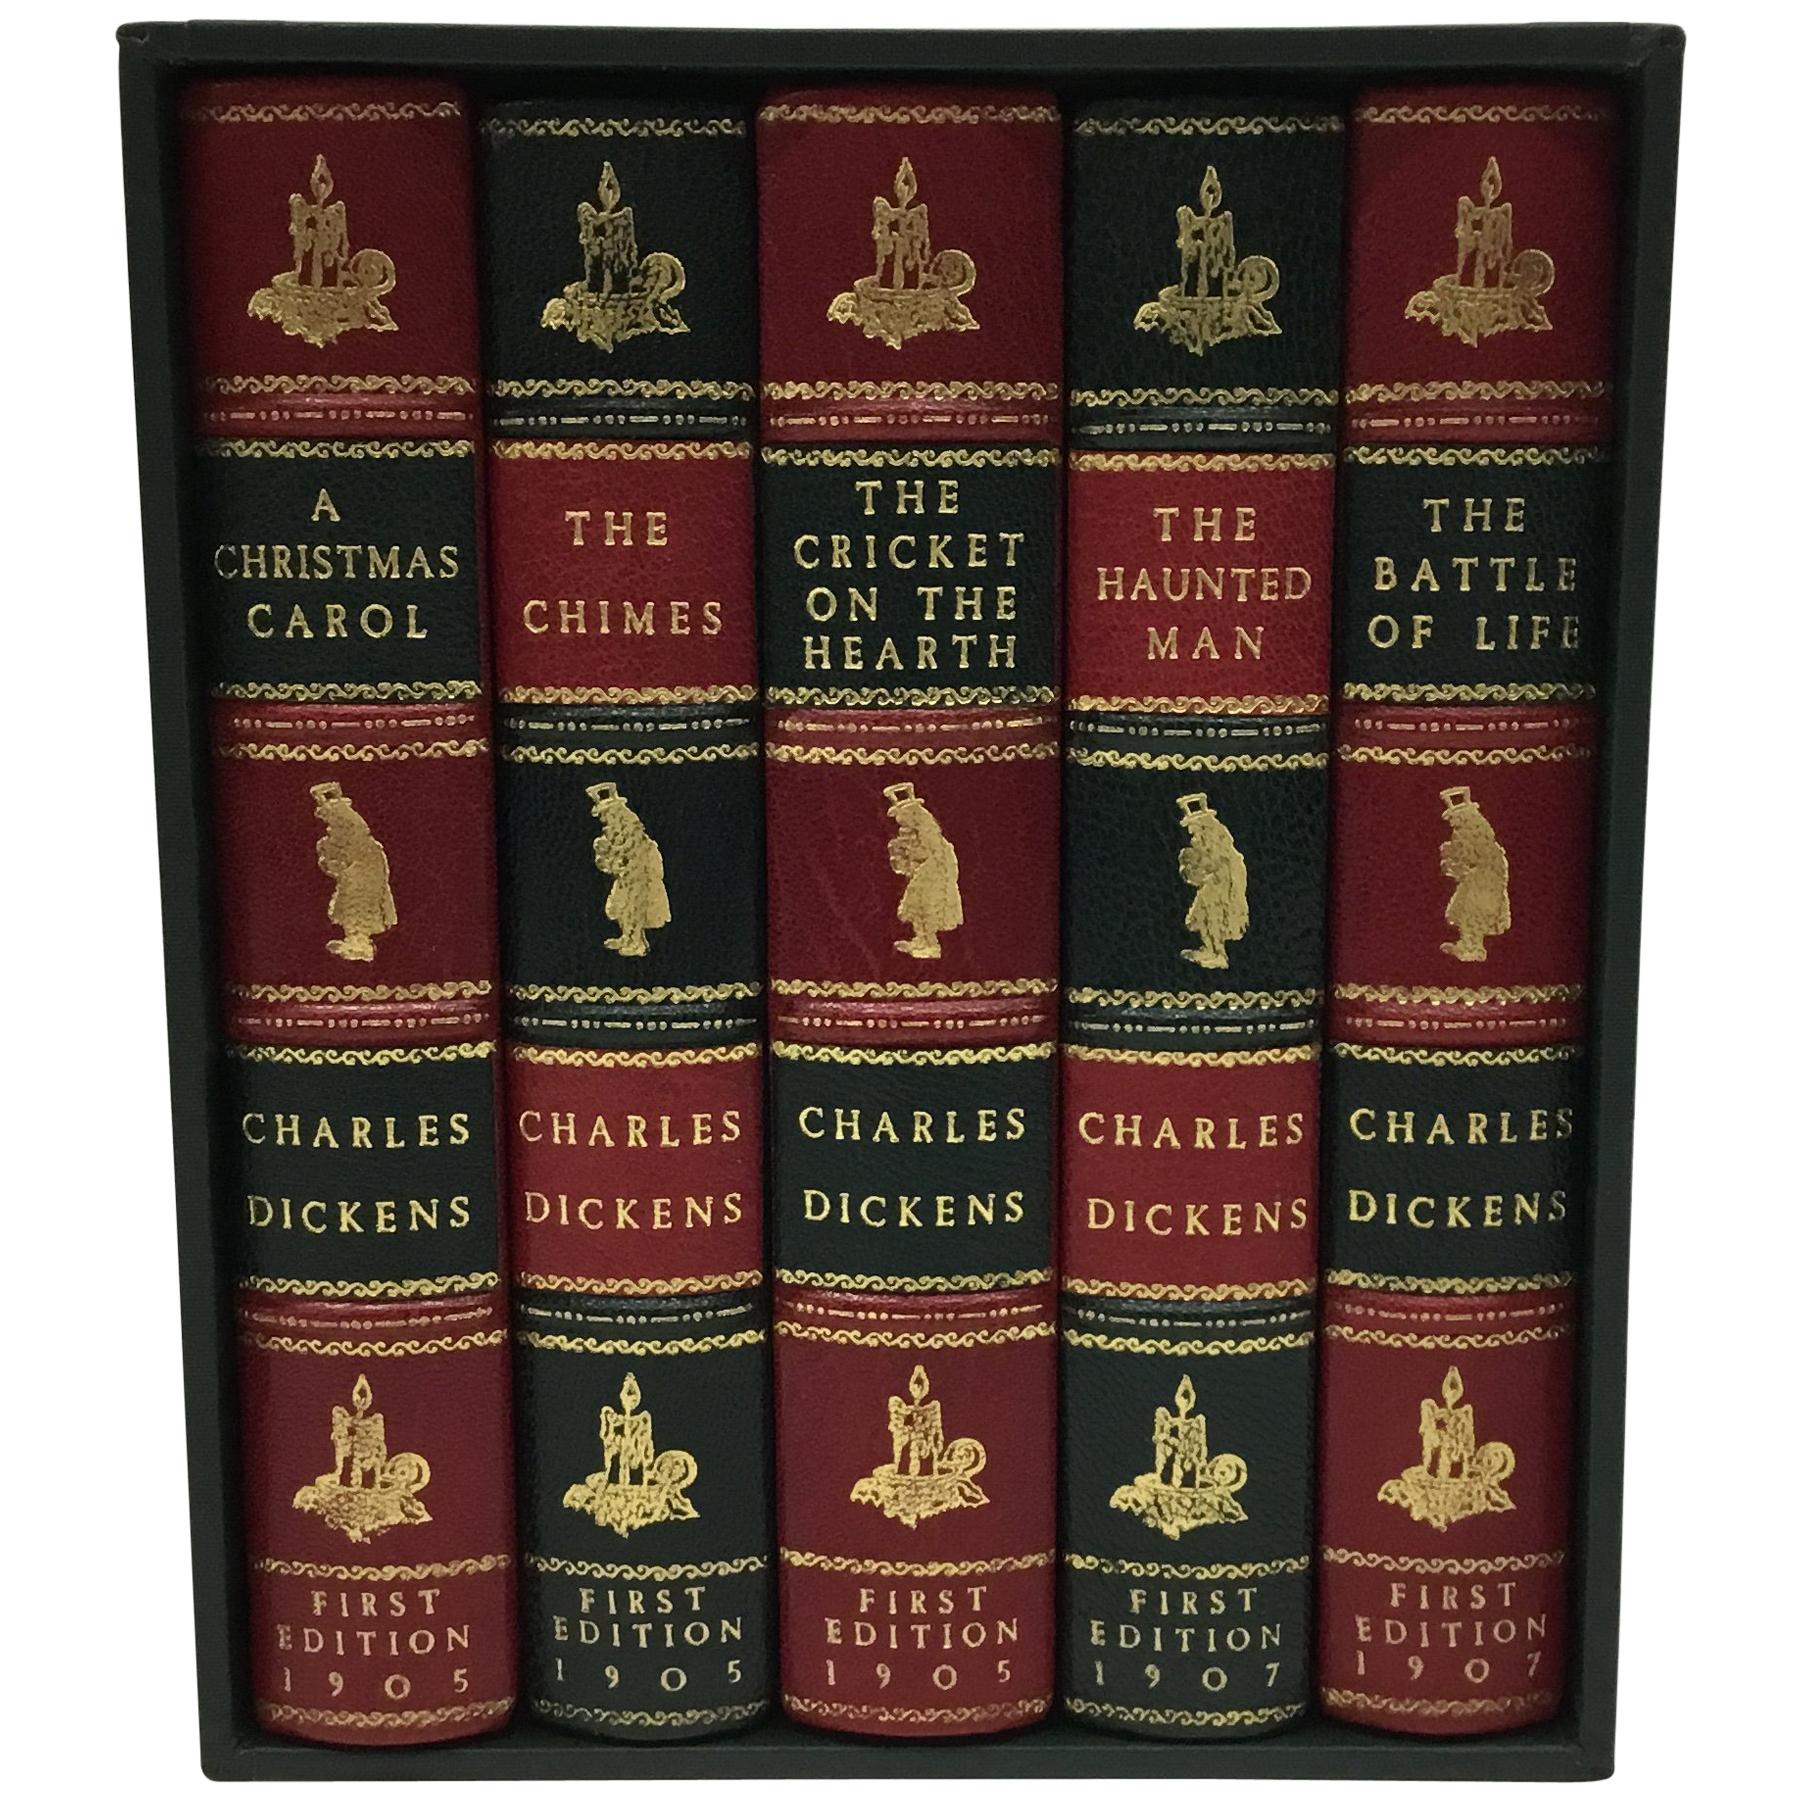 Charles Dickens Christmas Books, Special Illustrated First Edition Set, 1905-07